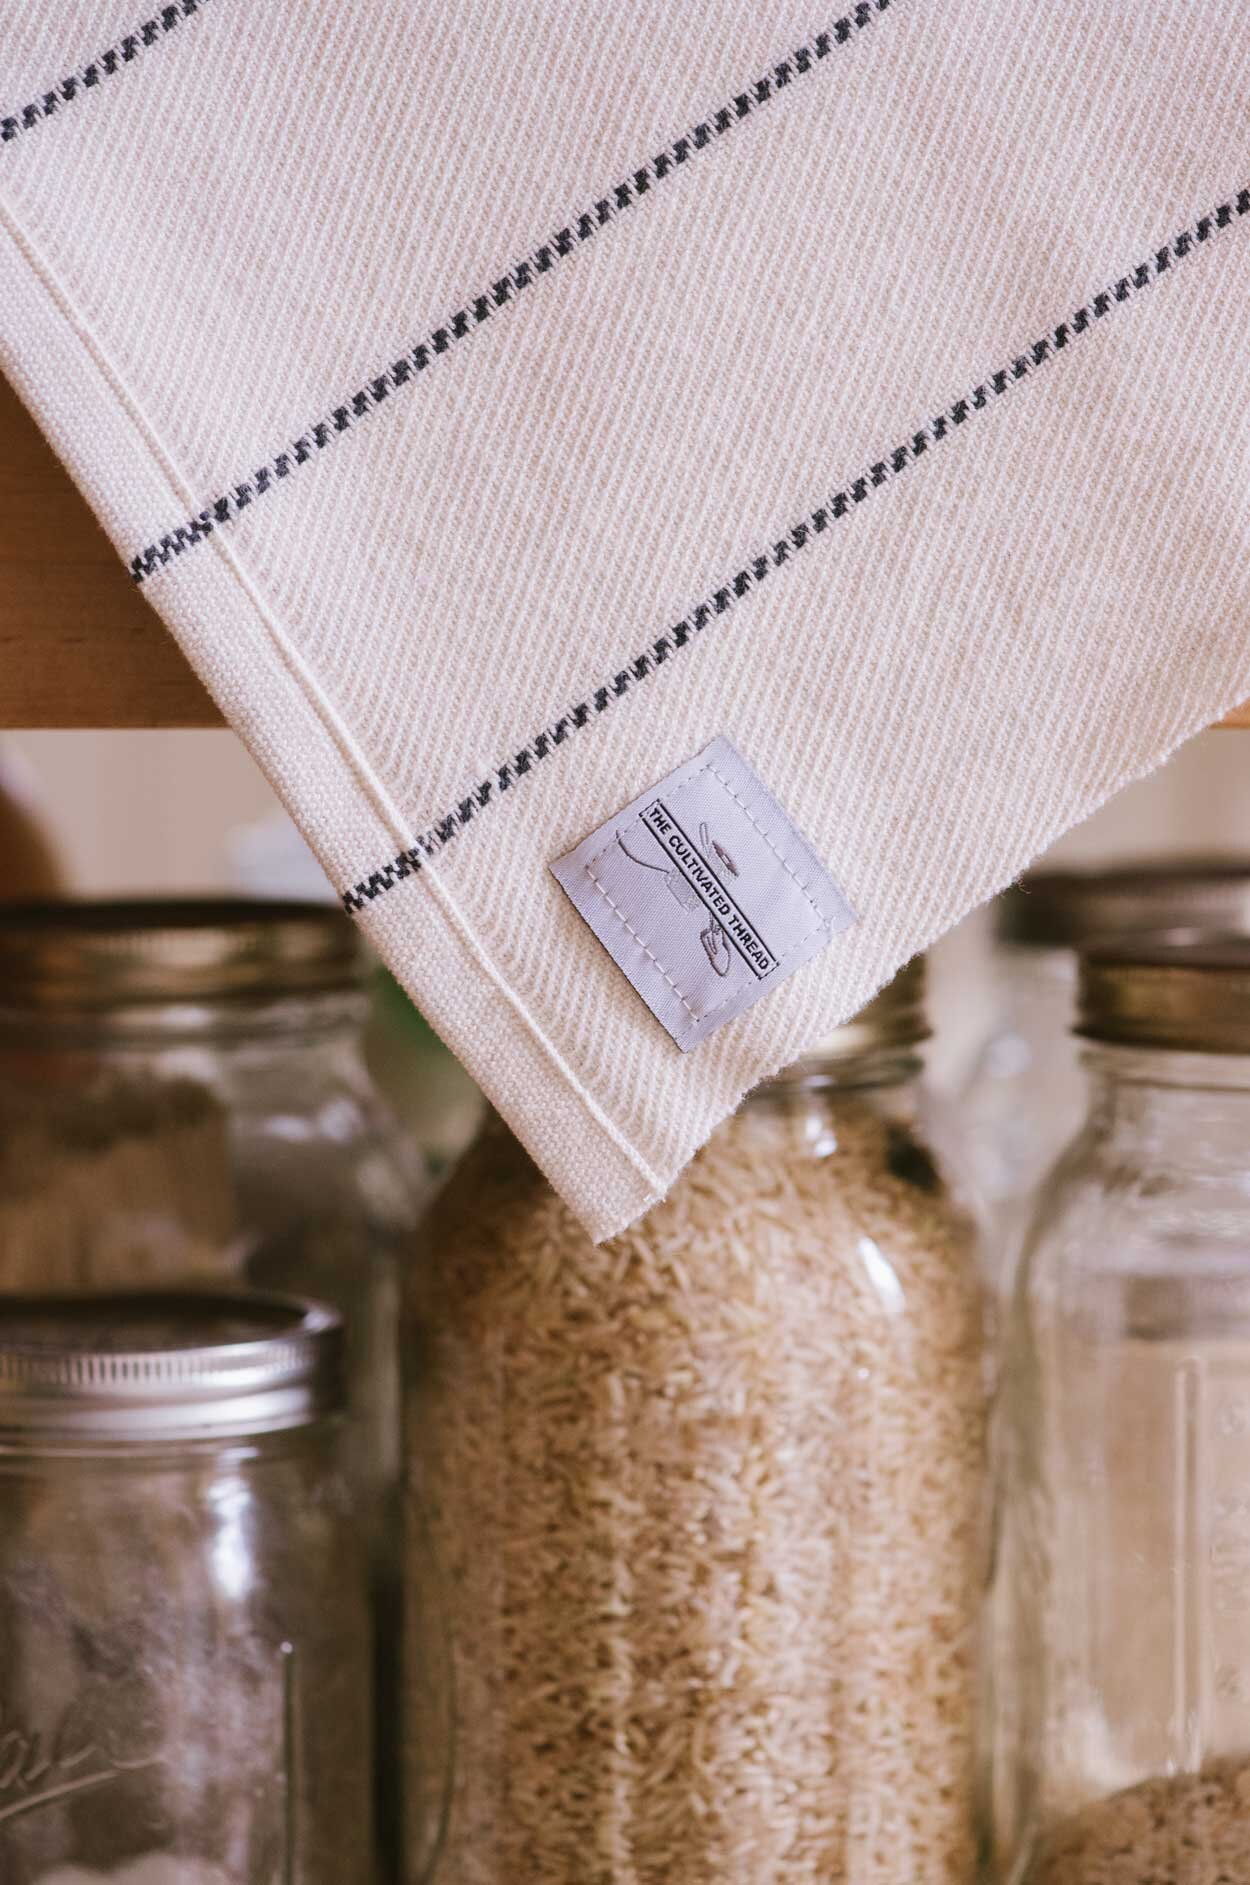  Whether tea towel, mat, or coaster, The Cultivated Thread products are both fashionable and functional. 